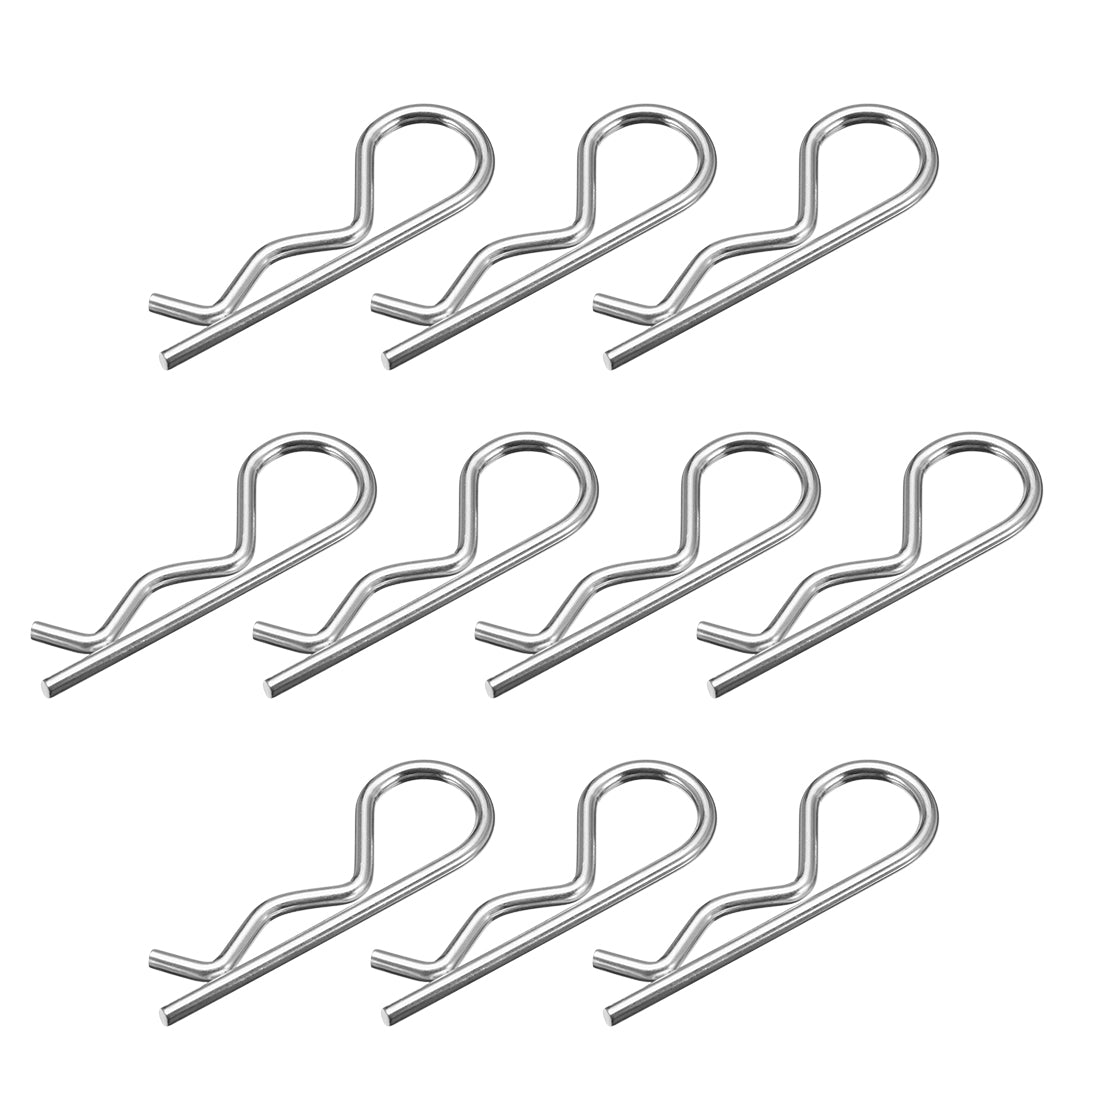 uxcell Uxcell 3mm x 60mm Carbon Steel R Shaped Spring Cotter Clip Pin Fastener Hardware Silver Tone 10 Pcs